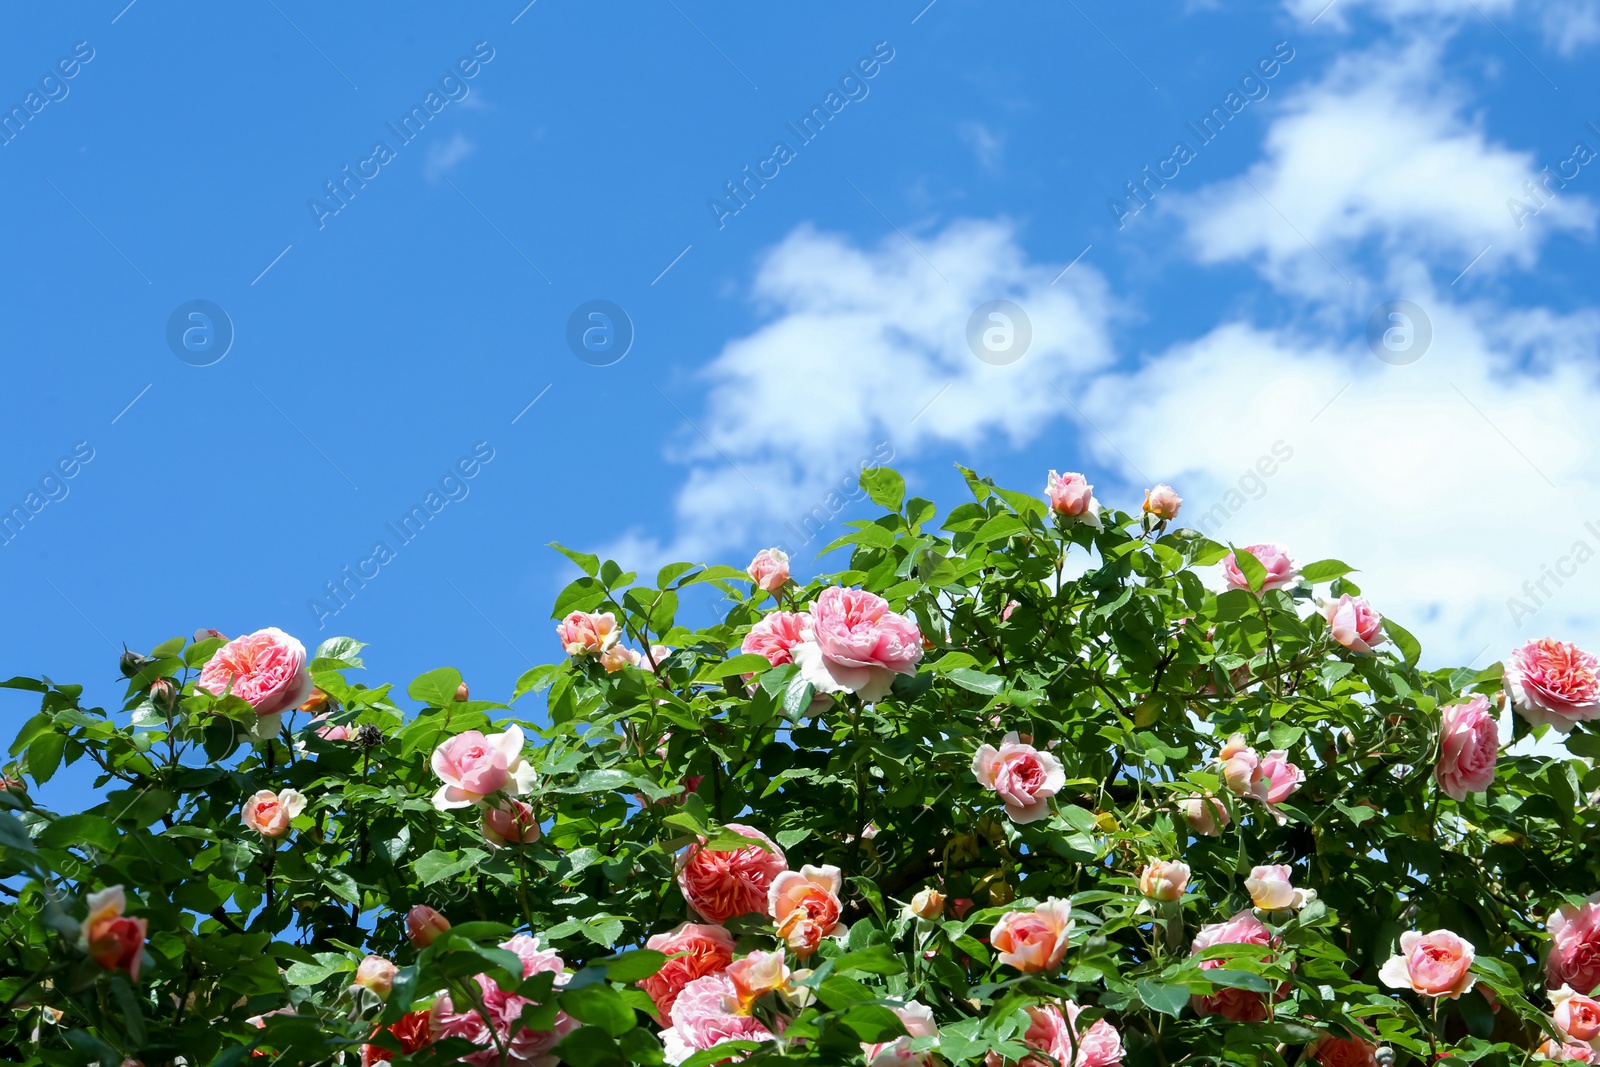 Photo of Blooming roses with beautiful flowers growing against blue sky, low angle view. Space for text